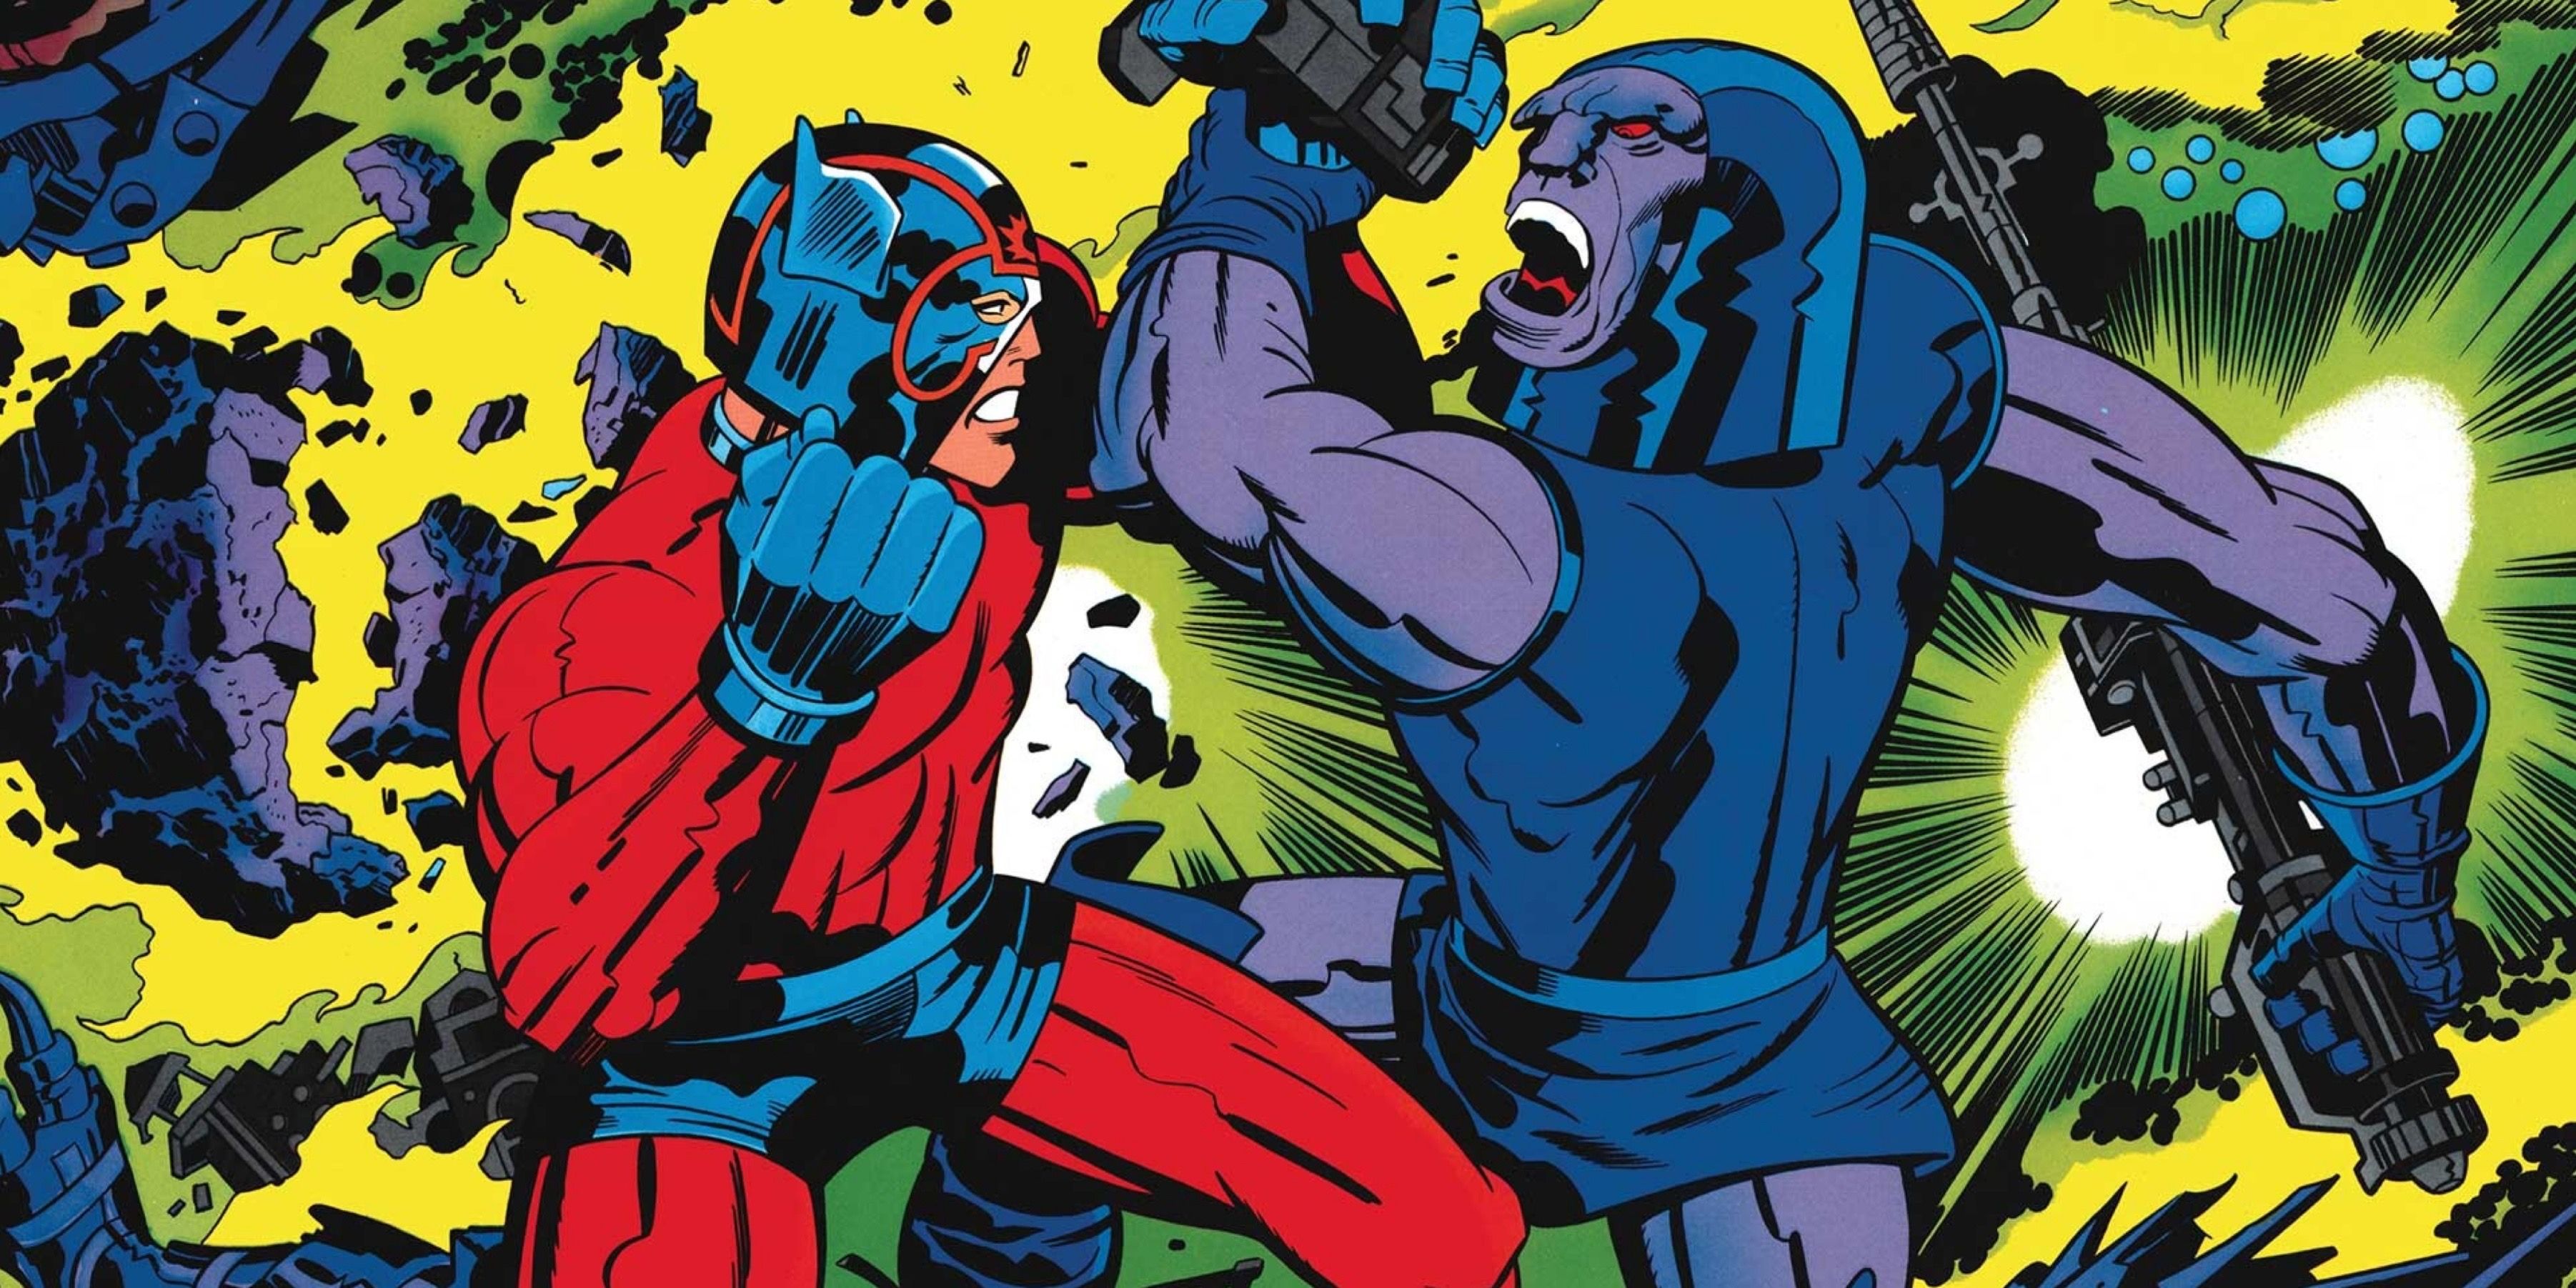 Orion and Darksied battle, New Gods and Fourth World